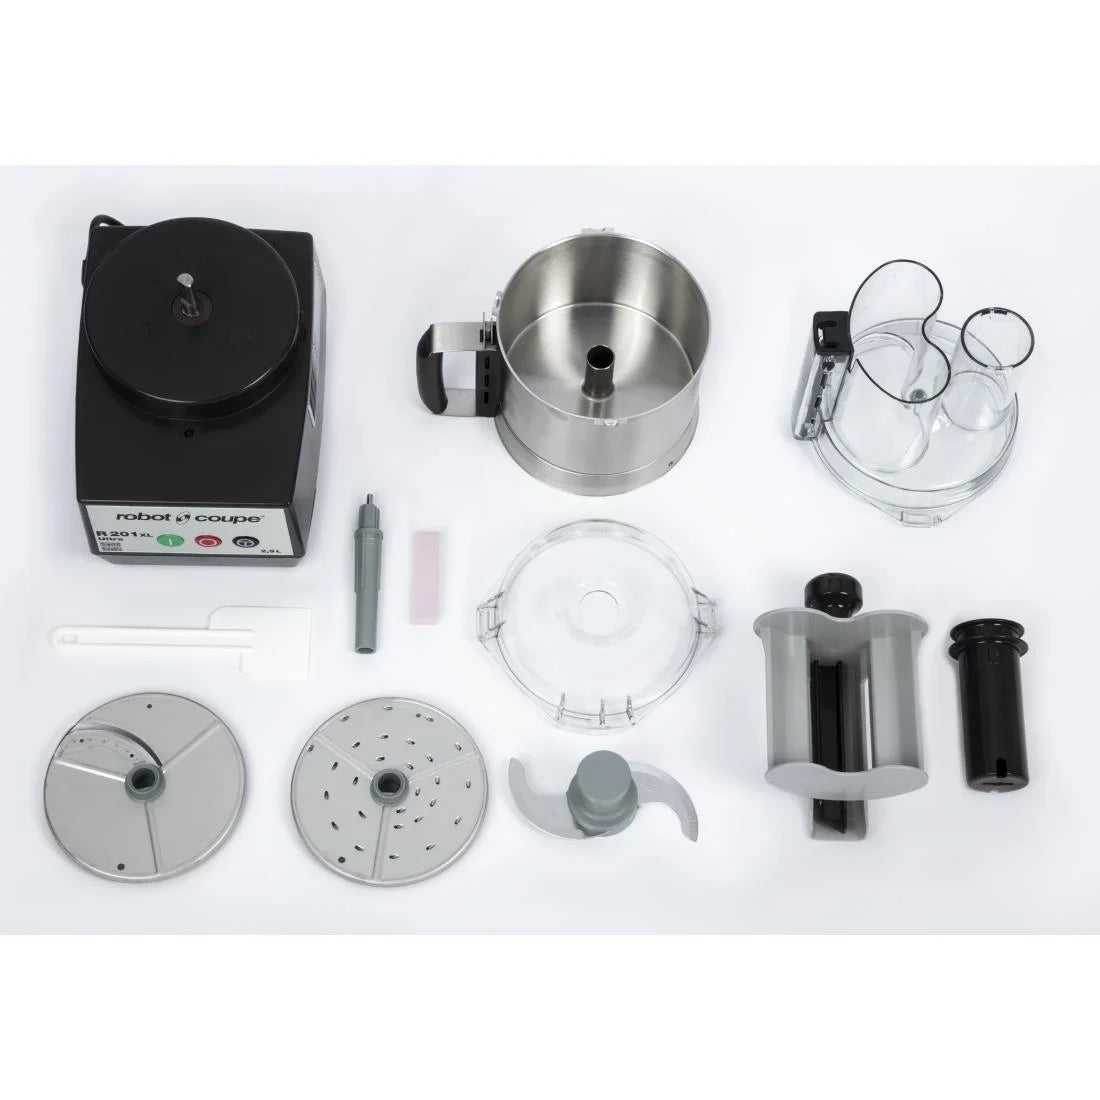 Robot Coupe Food Processor R201XL Ultra.Product Ref:00723.Model: R201XL. 🚚 3-5 Days Delivery